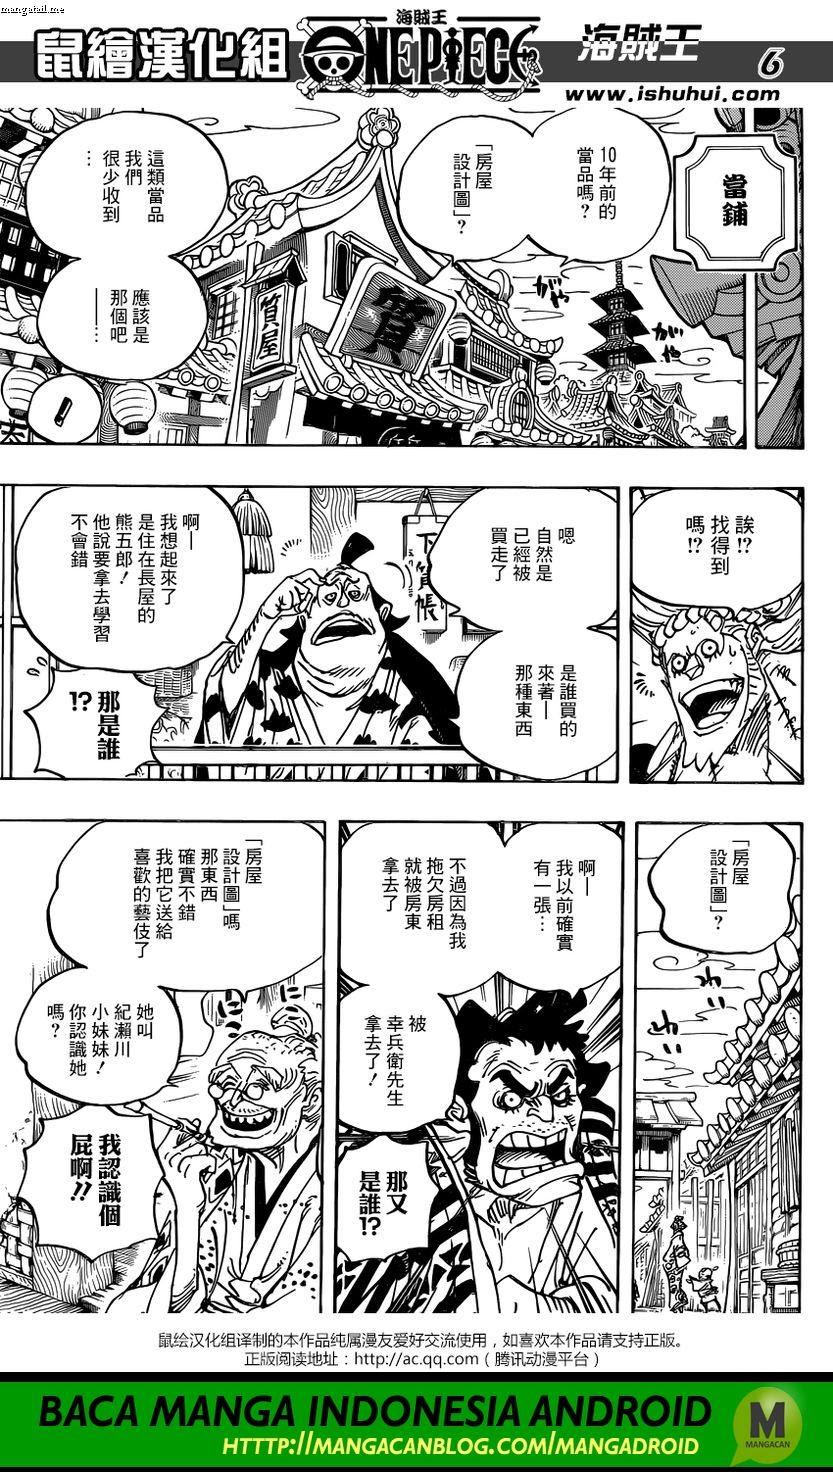 One Piece Chapter 928 – Raw - 101